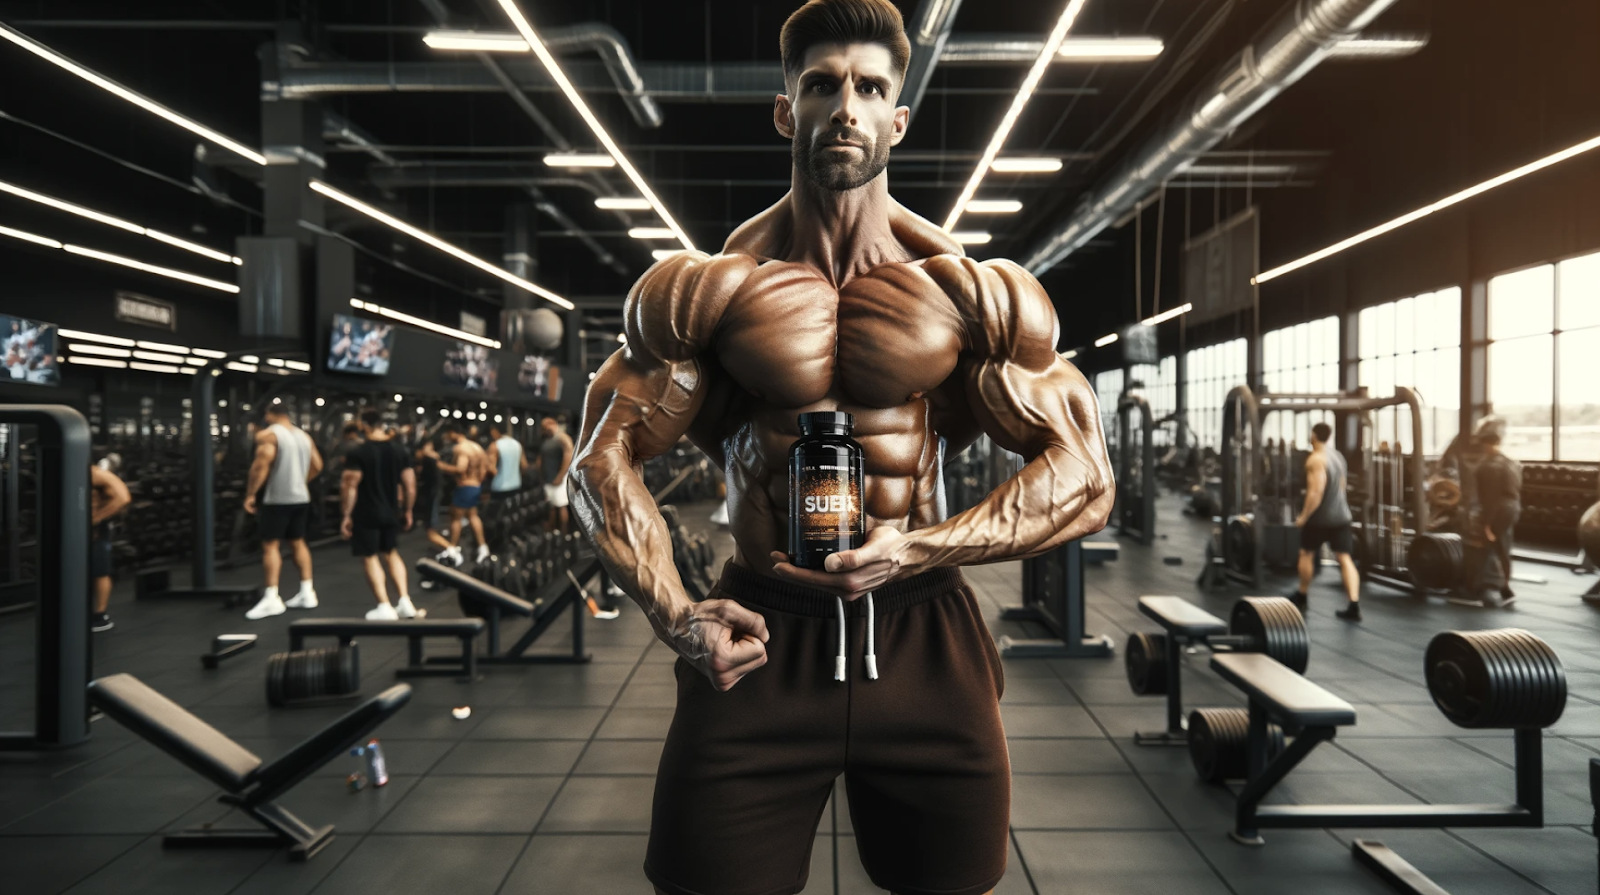 Man in a gym holding a supplement bottle